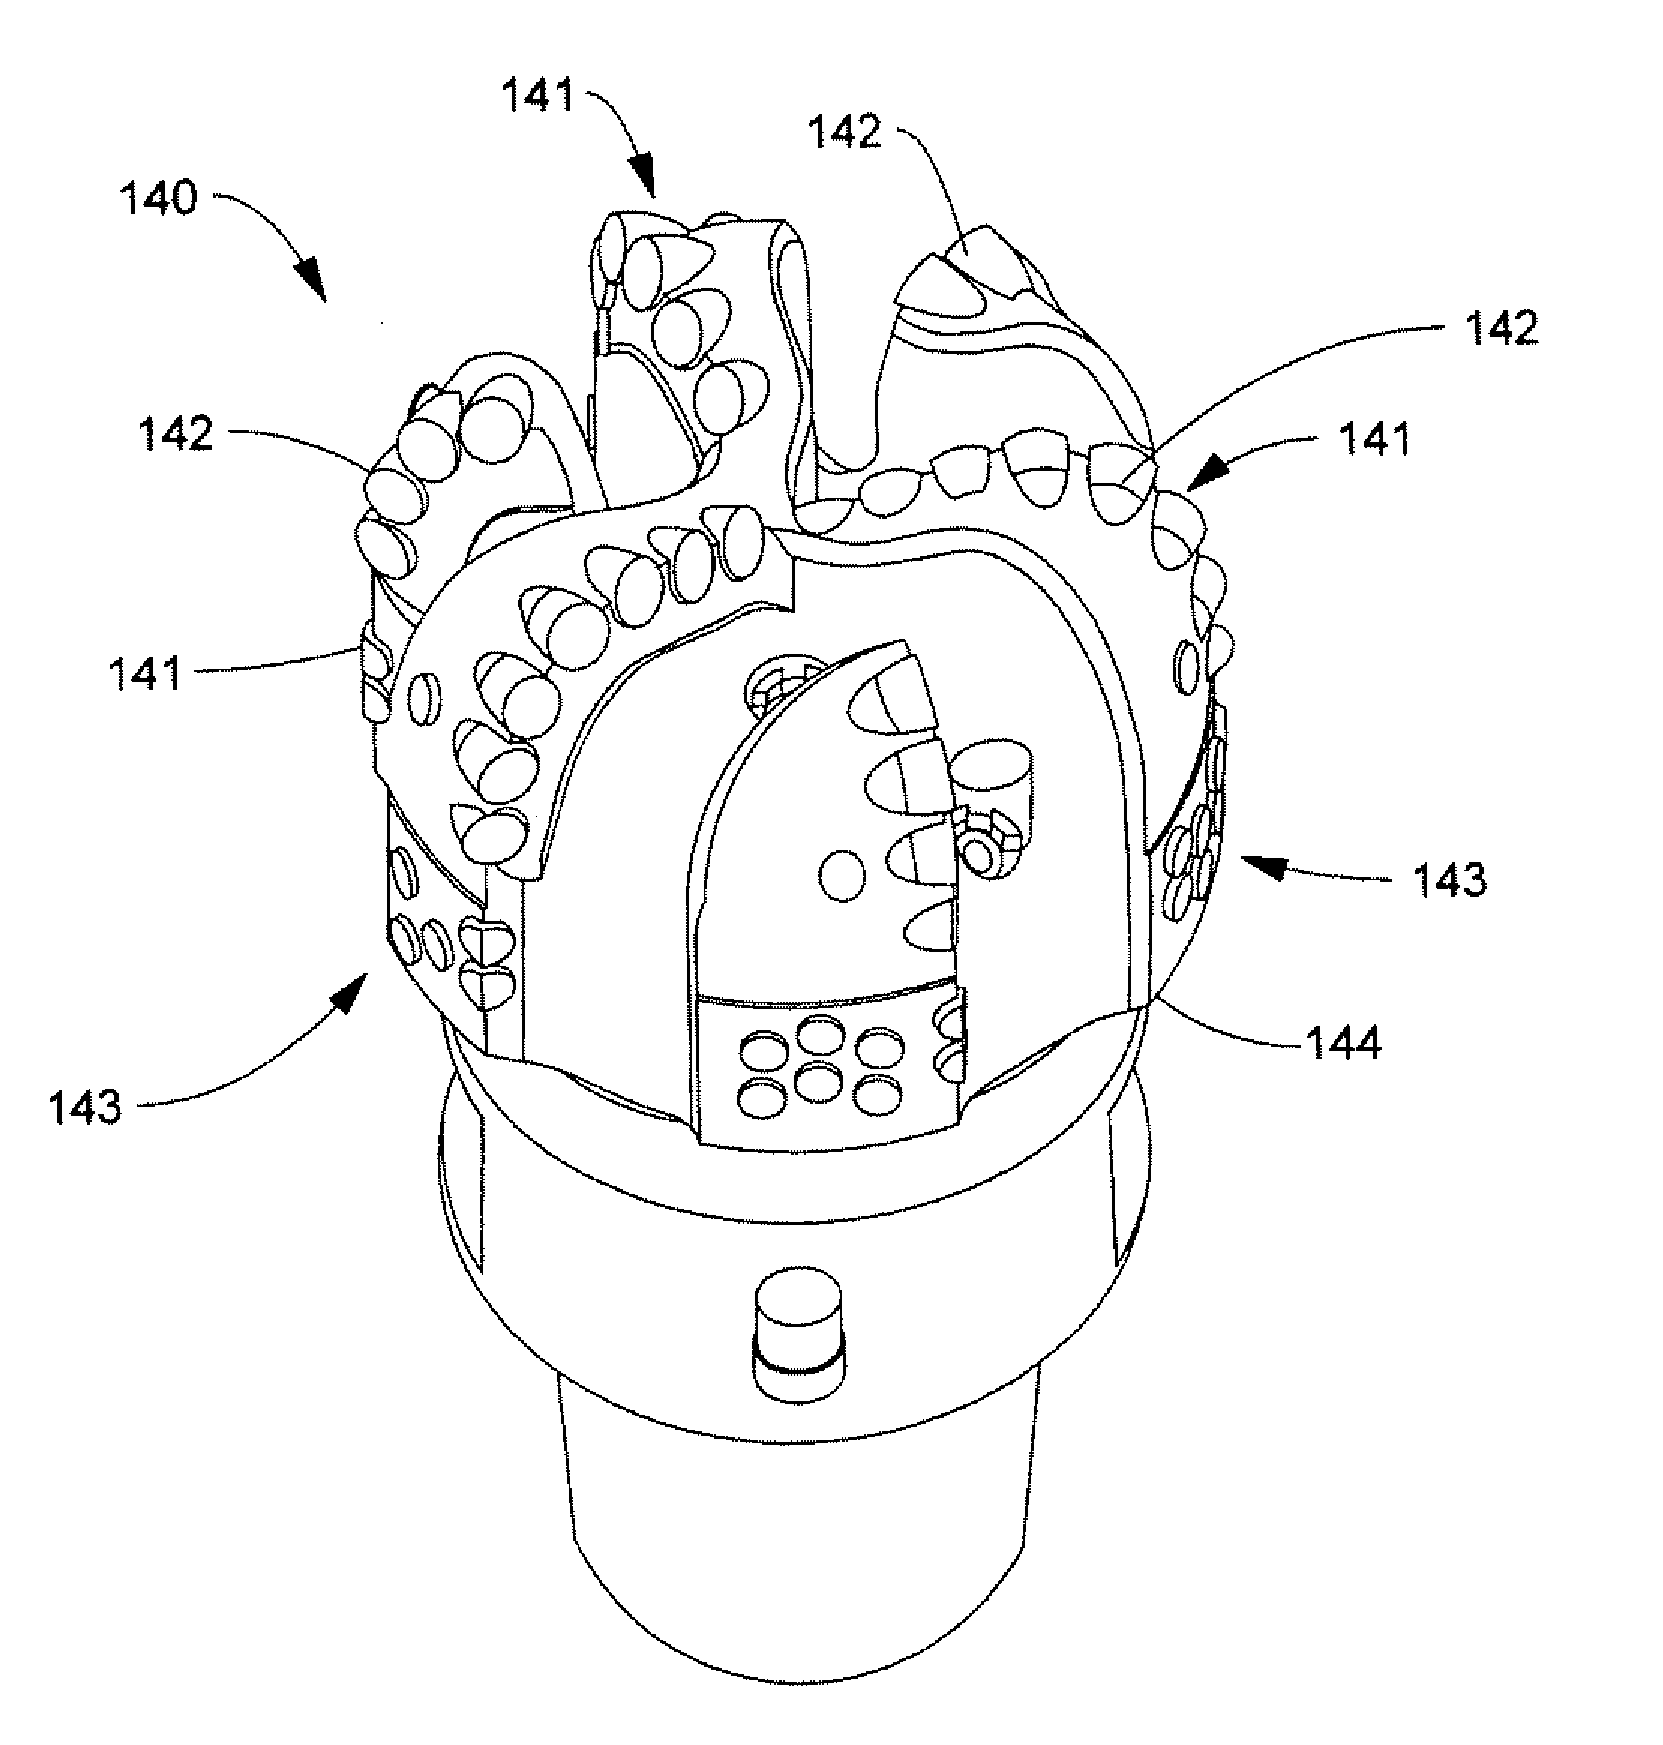 Sintered bodies for earth-boring rotary drill bits and methods of forming the same